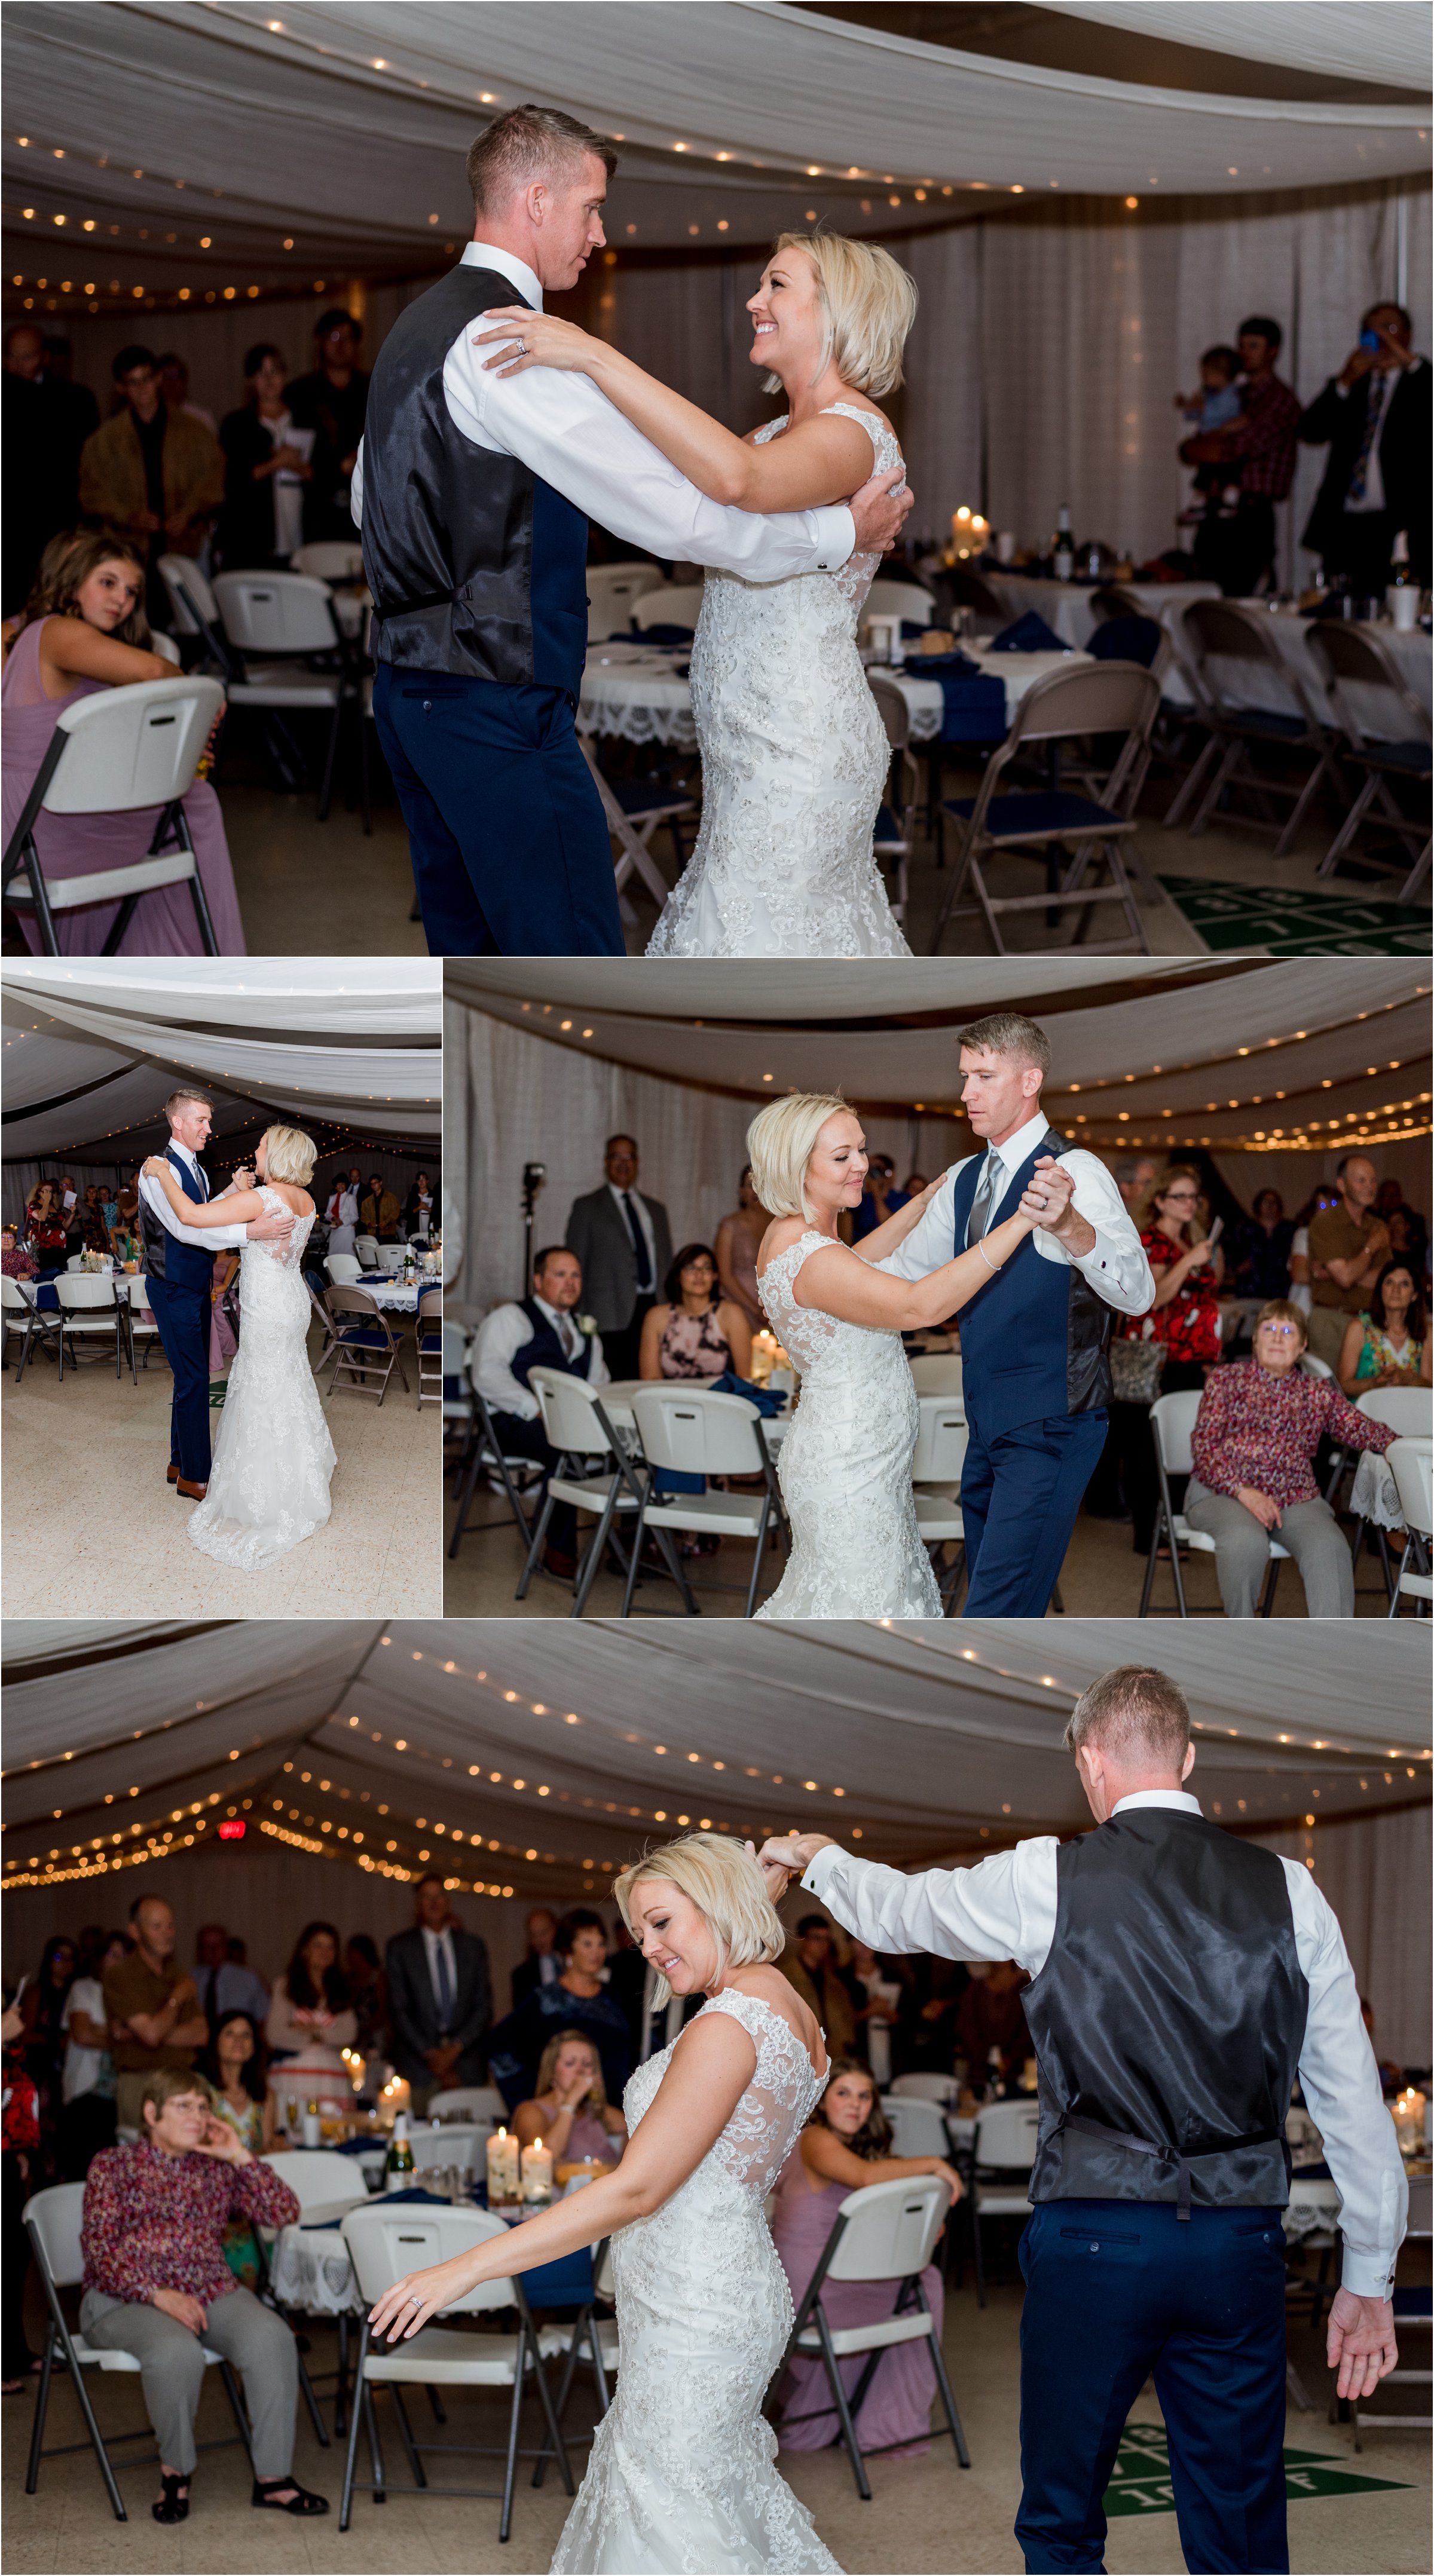 bride and groom dance their first dance together at their cheyenne wedding reception